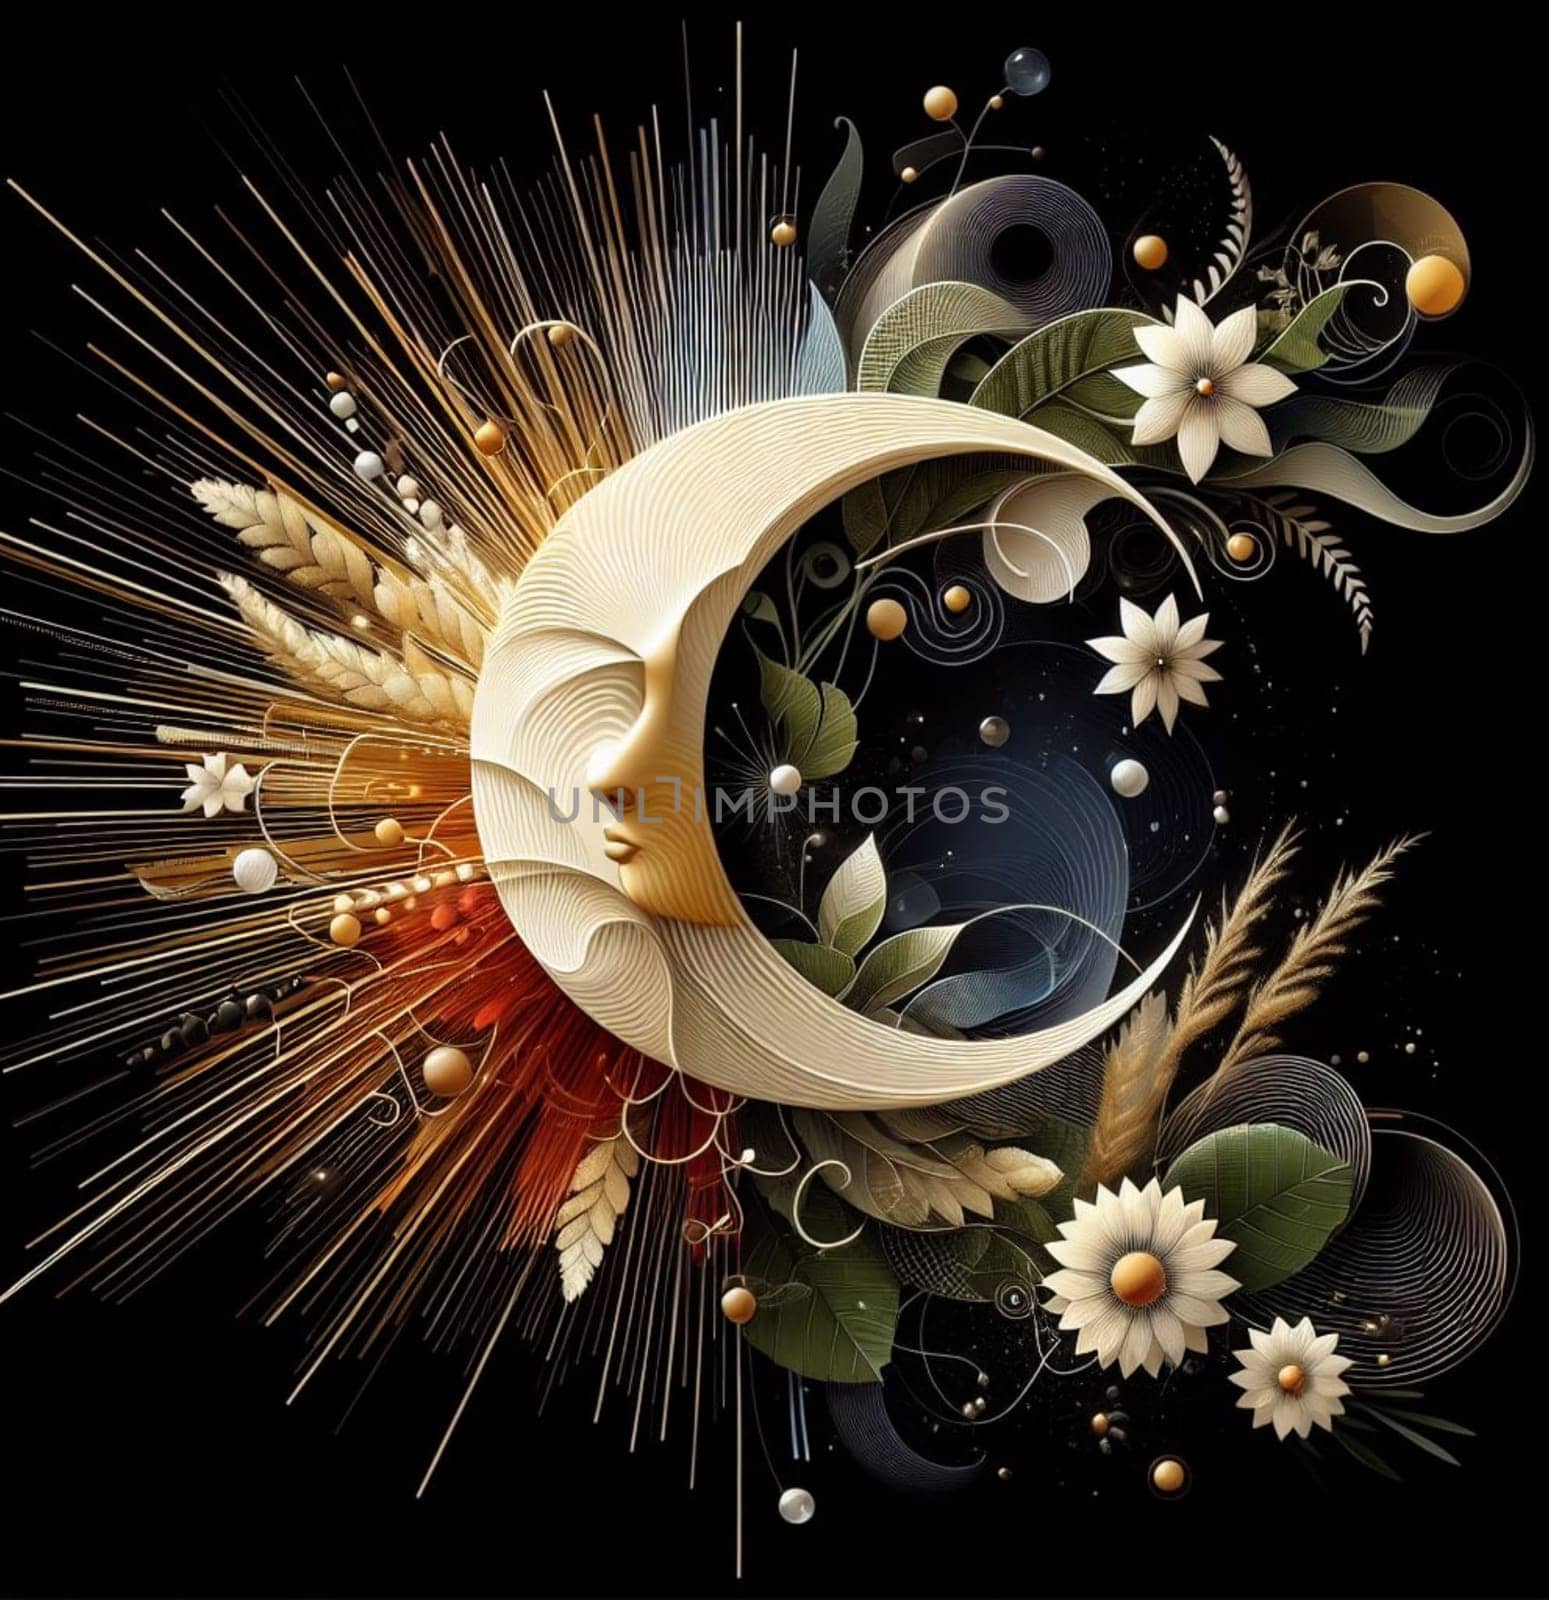 A large, glowing, flowery moon with a star in the center. The moon is surrounded by a variety of flowers and plants, creating a whimsical and dreamy atmosphere